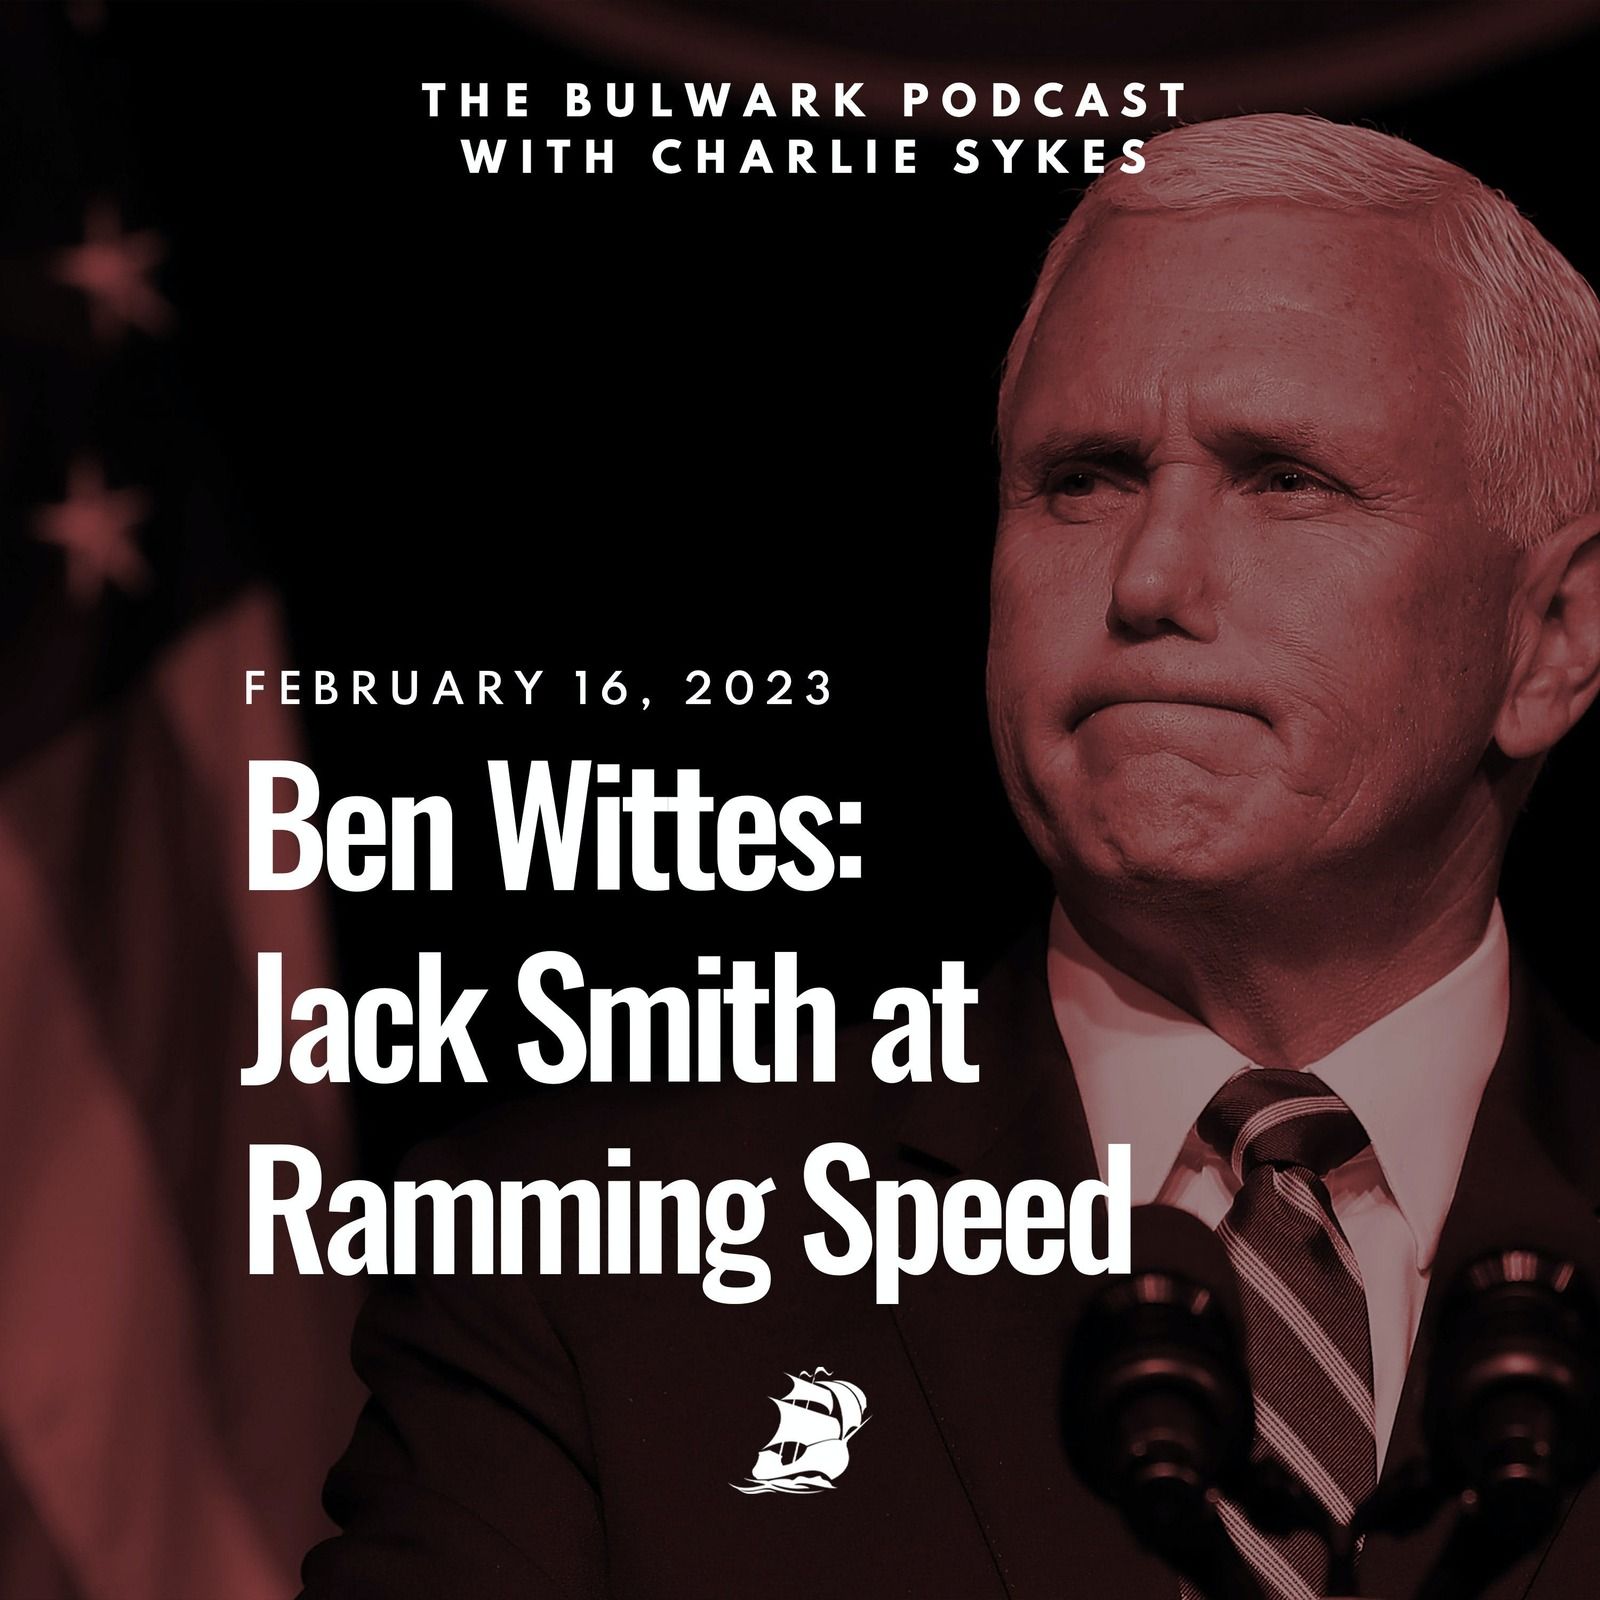 Ben Wittes: Jack Smith at Ramming Speed by The Bulwark Podcast